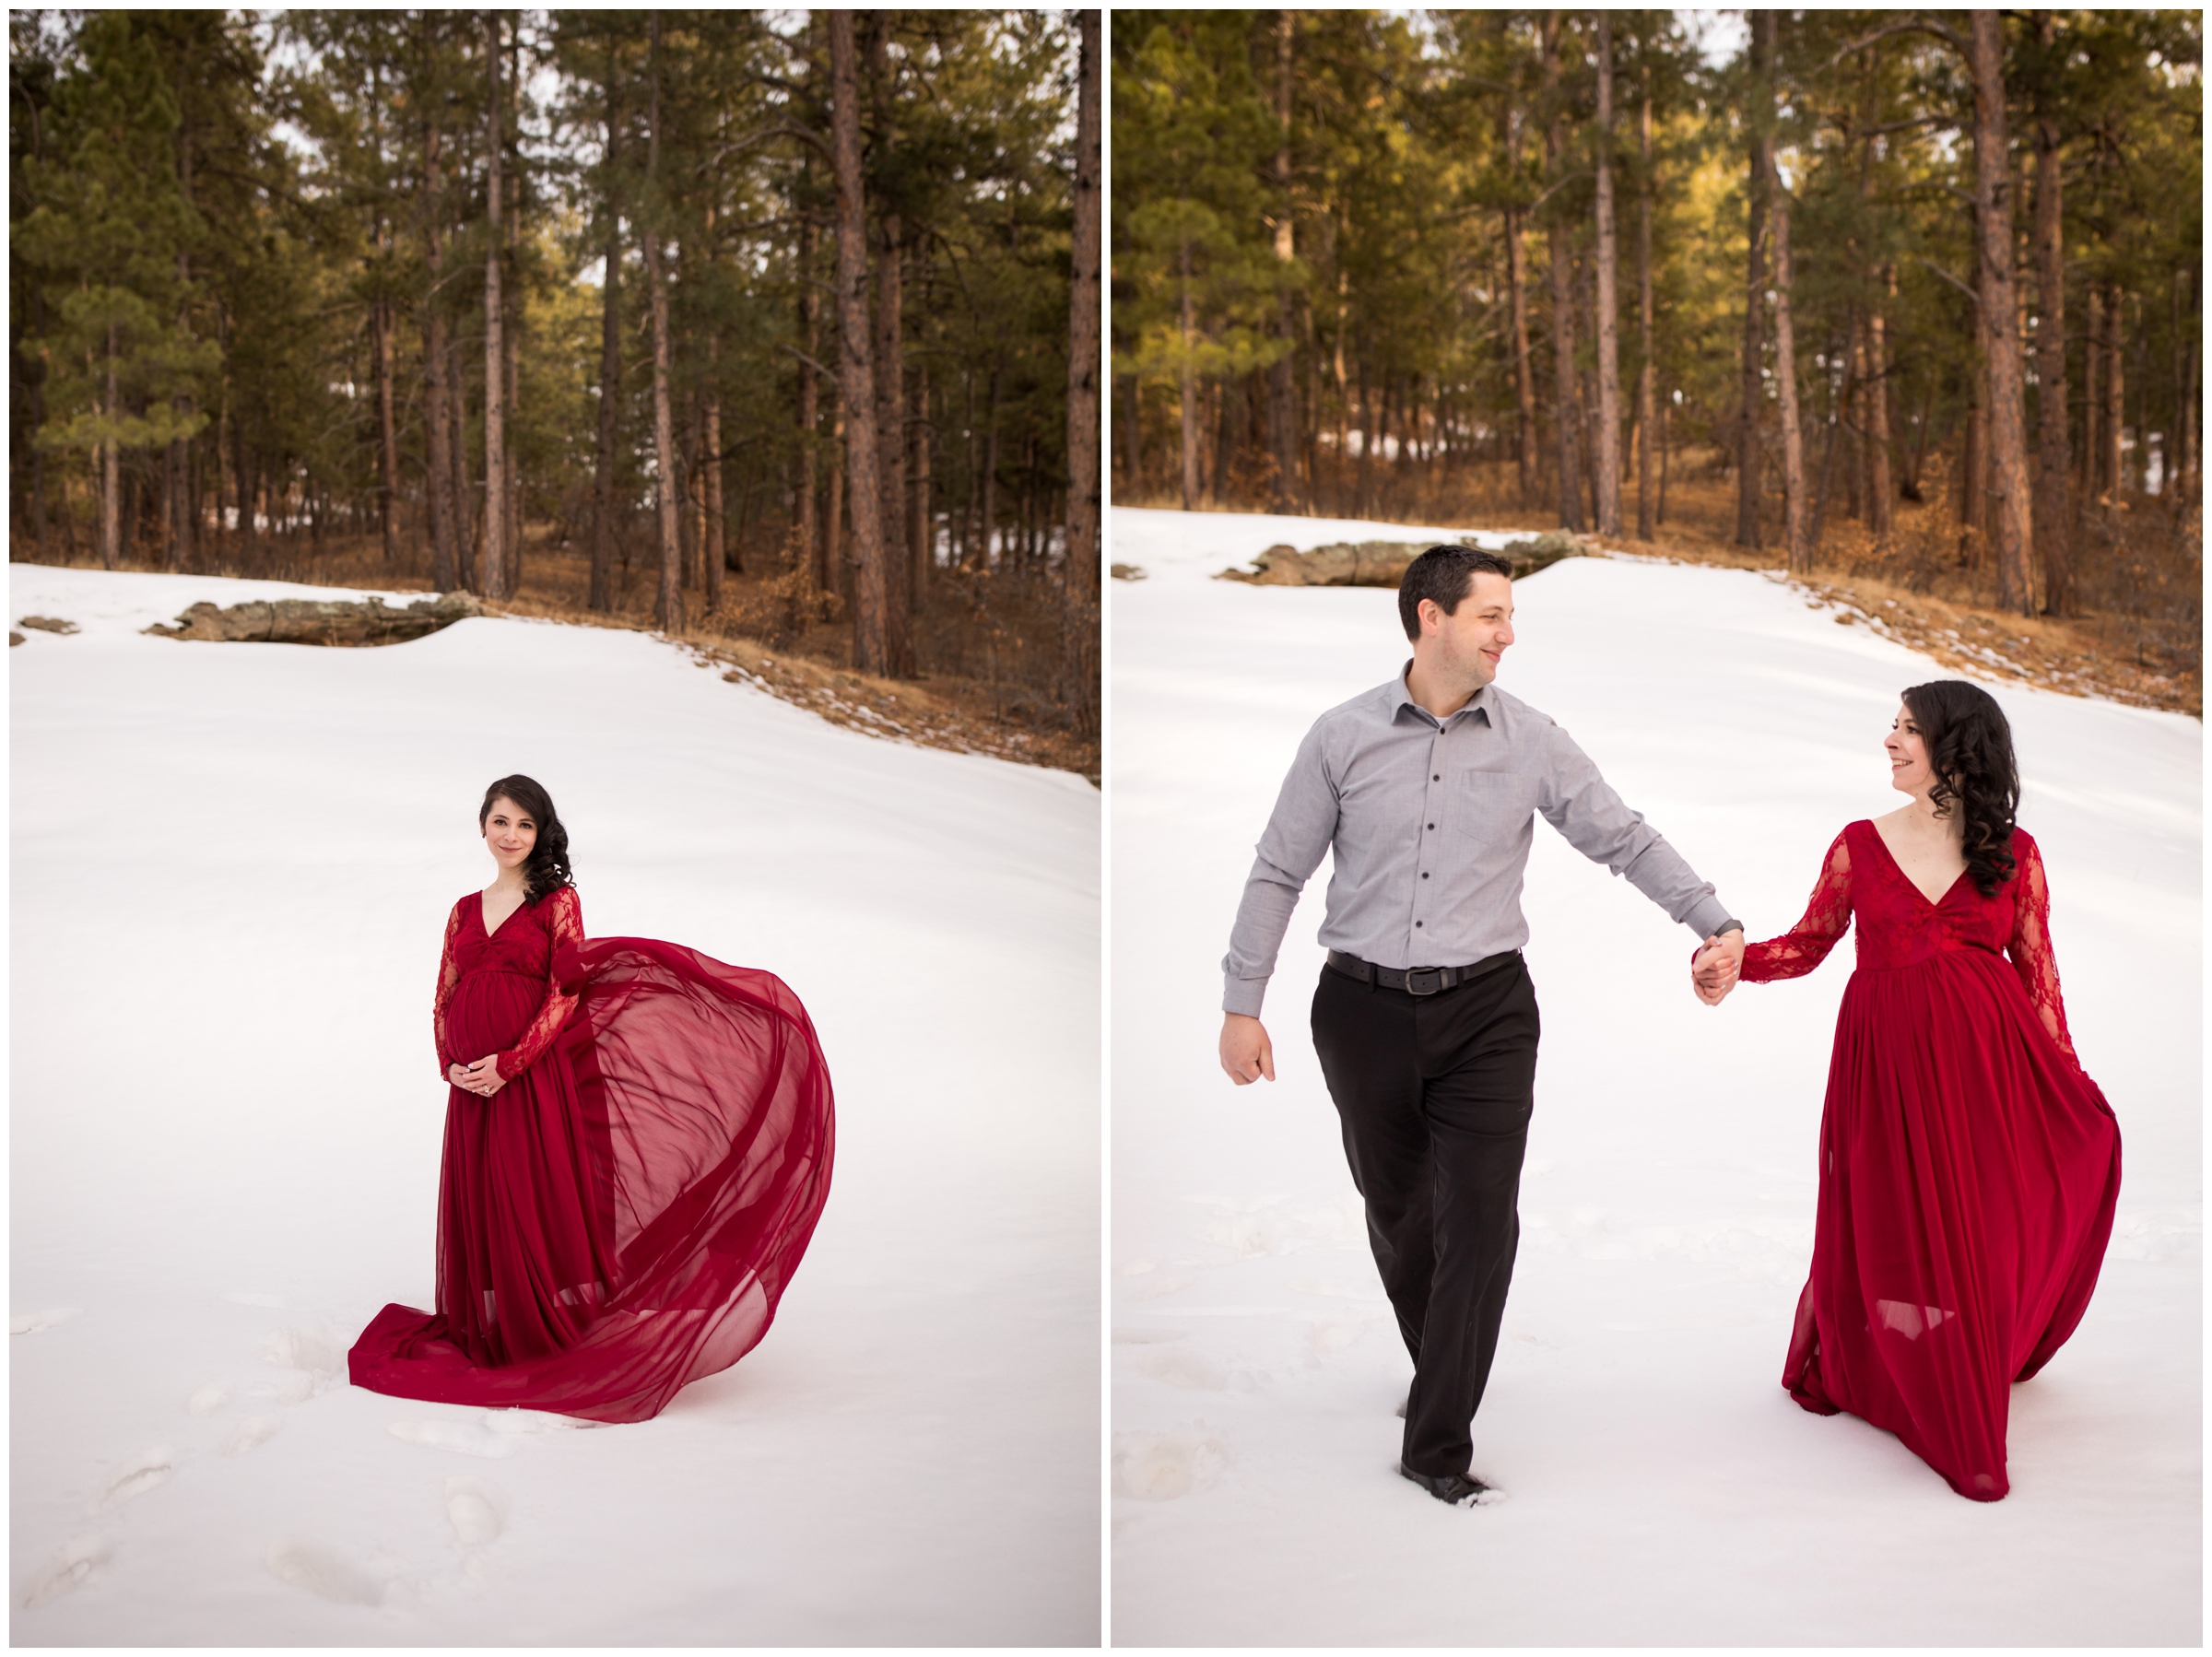 snowy forest maternity photography inspiration in Colorado by plum pretty photo